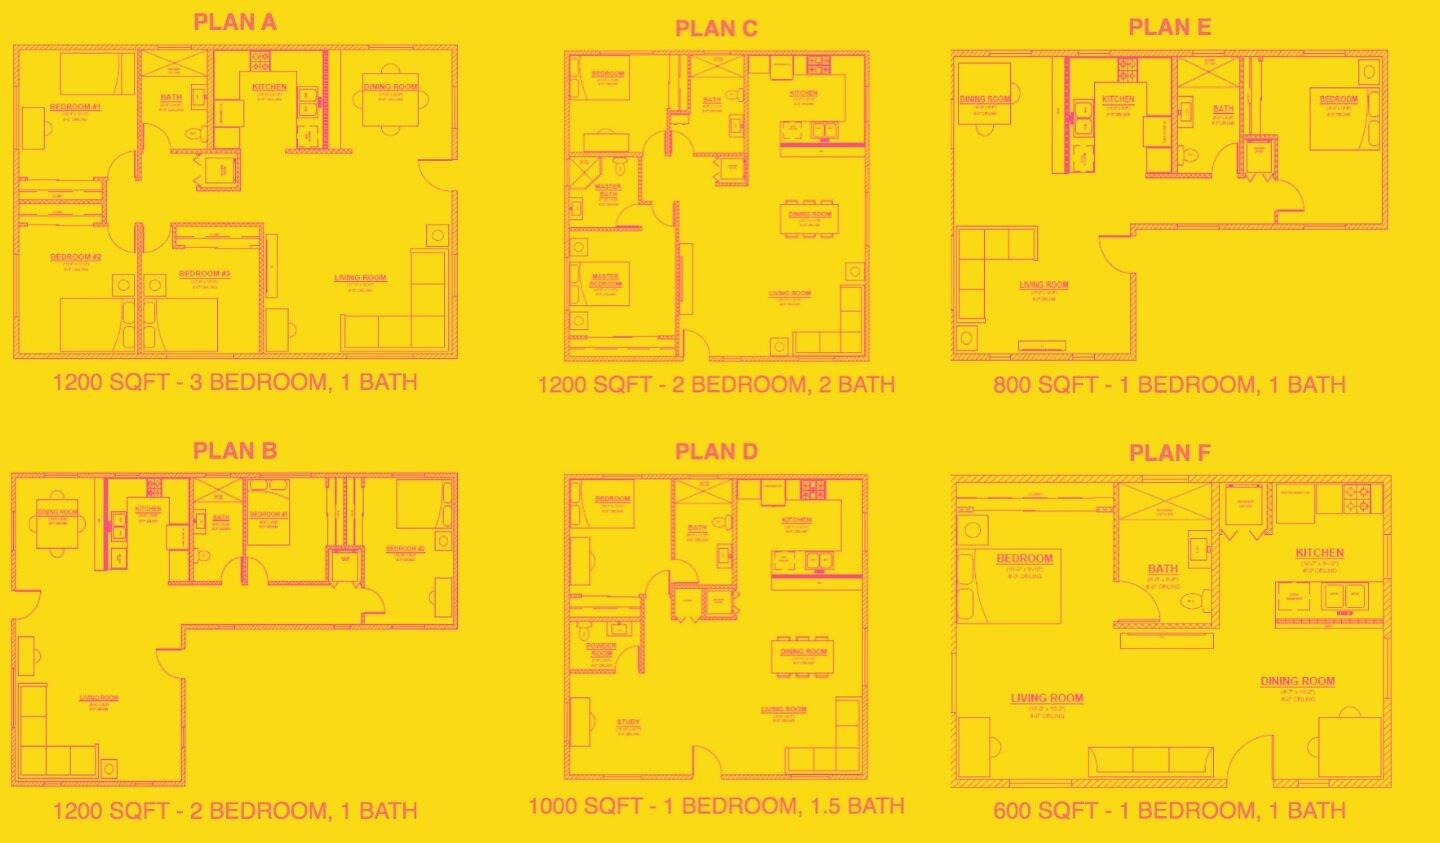 There are a lot of ways to get floor plans for your Accessory Dwelling Unit (ADU) These plans are courtesy of San Diego County